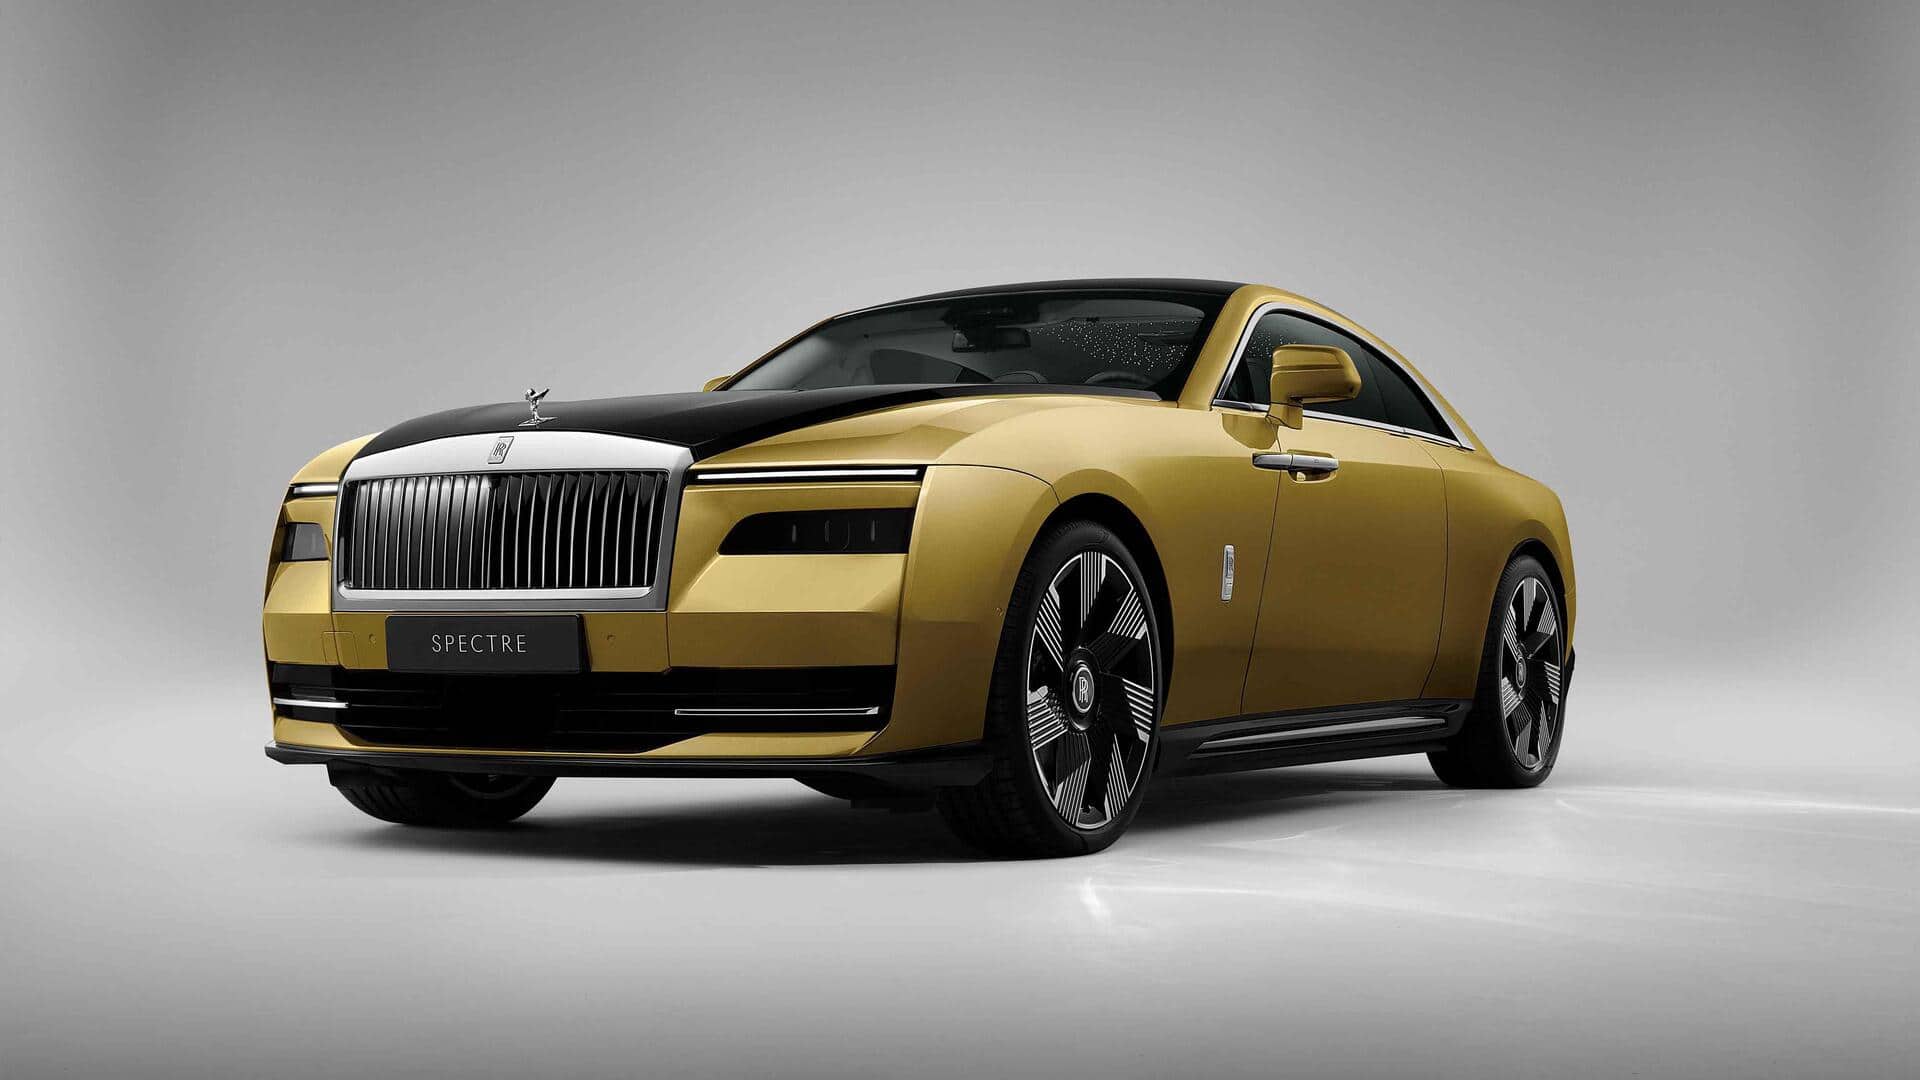 Top features of Rolls-Royce's first-ever EV, the Spectre explained